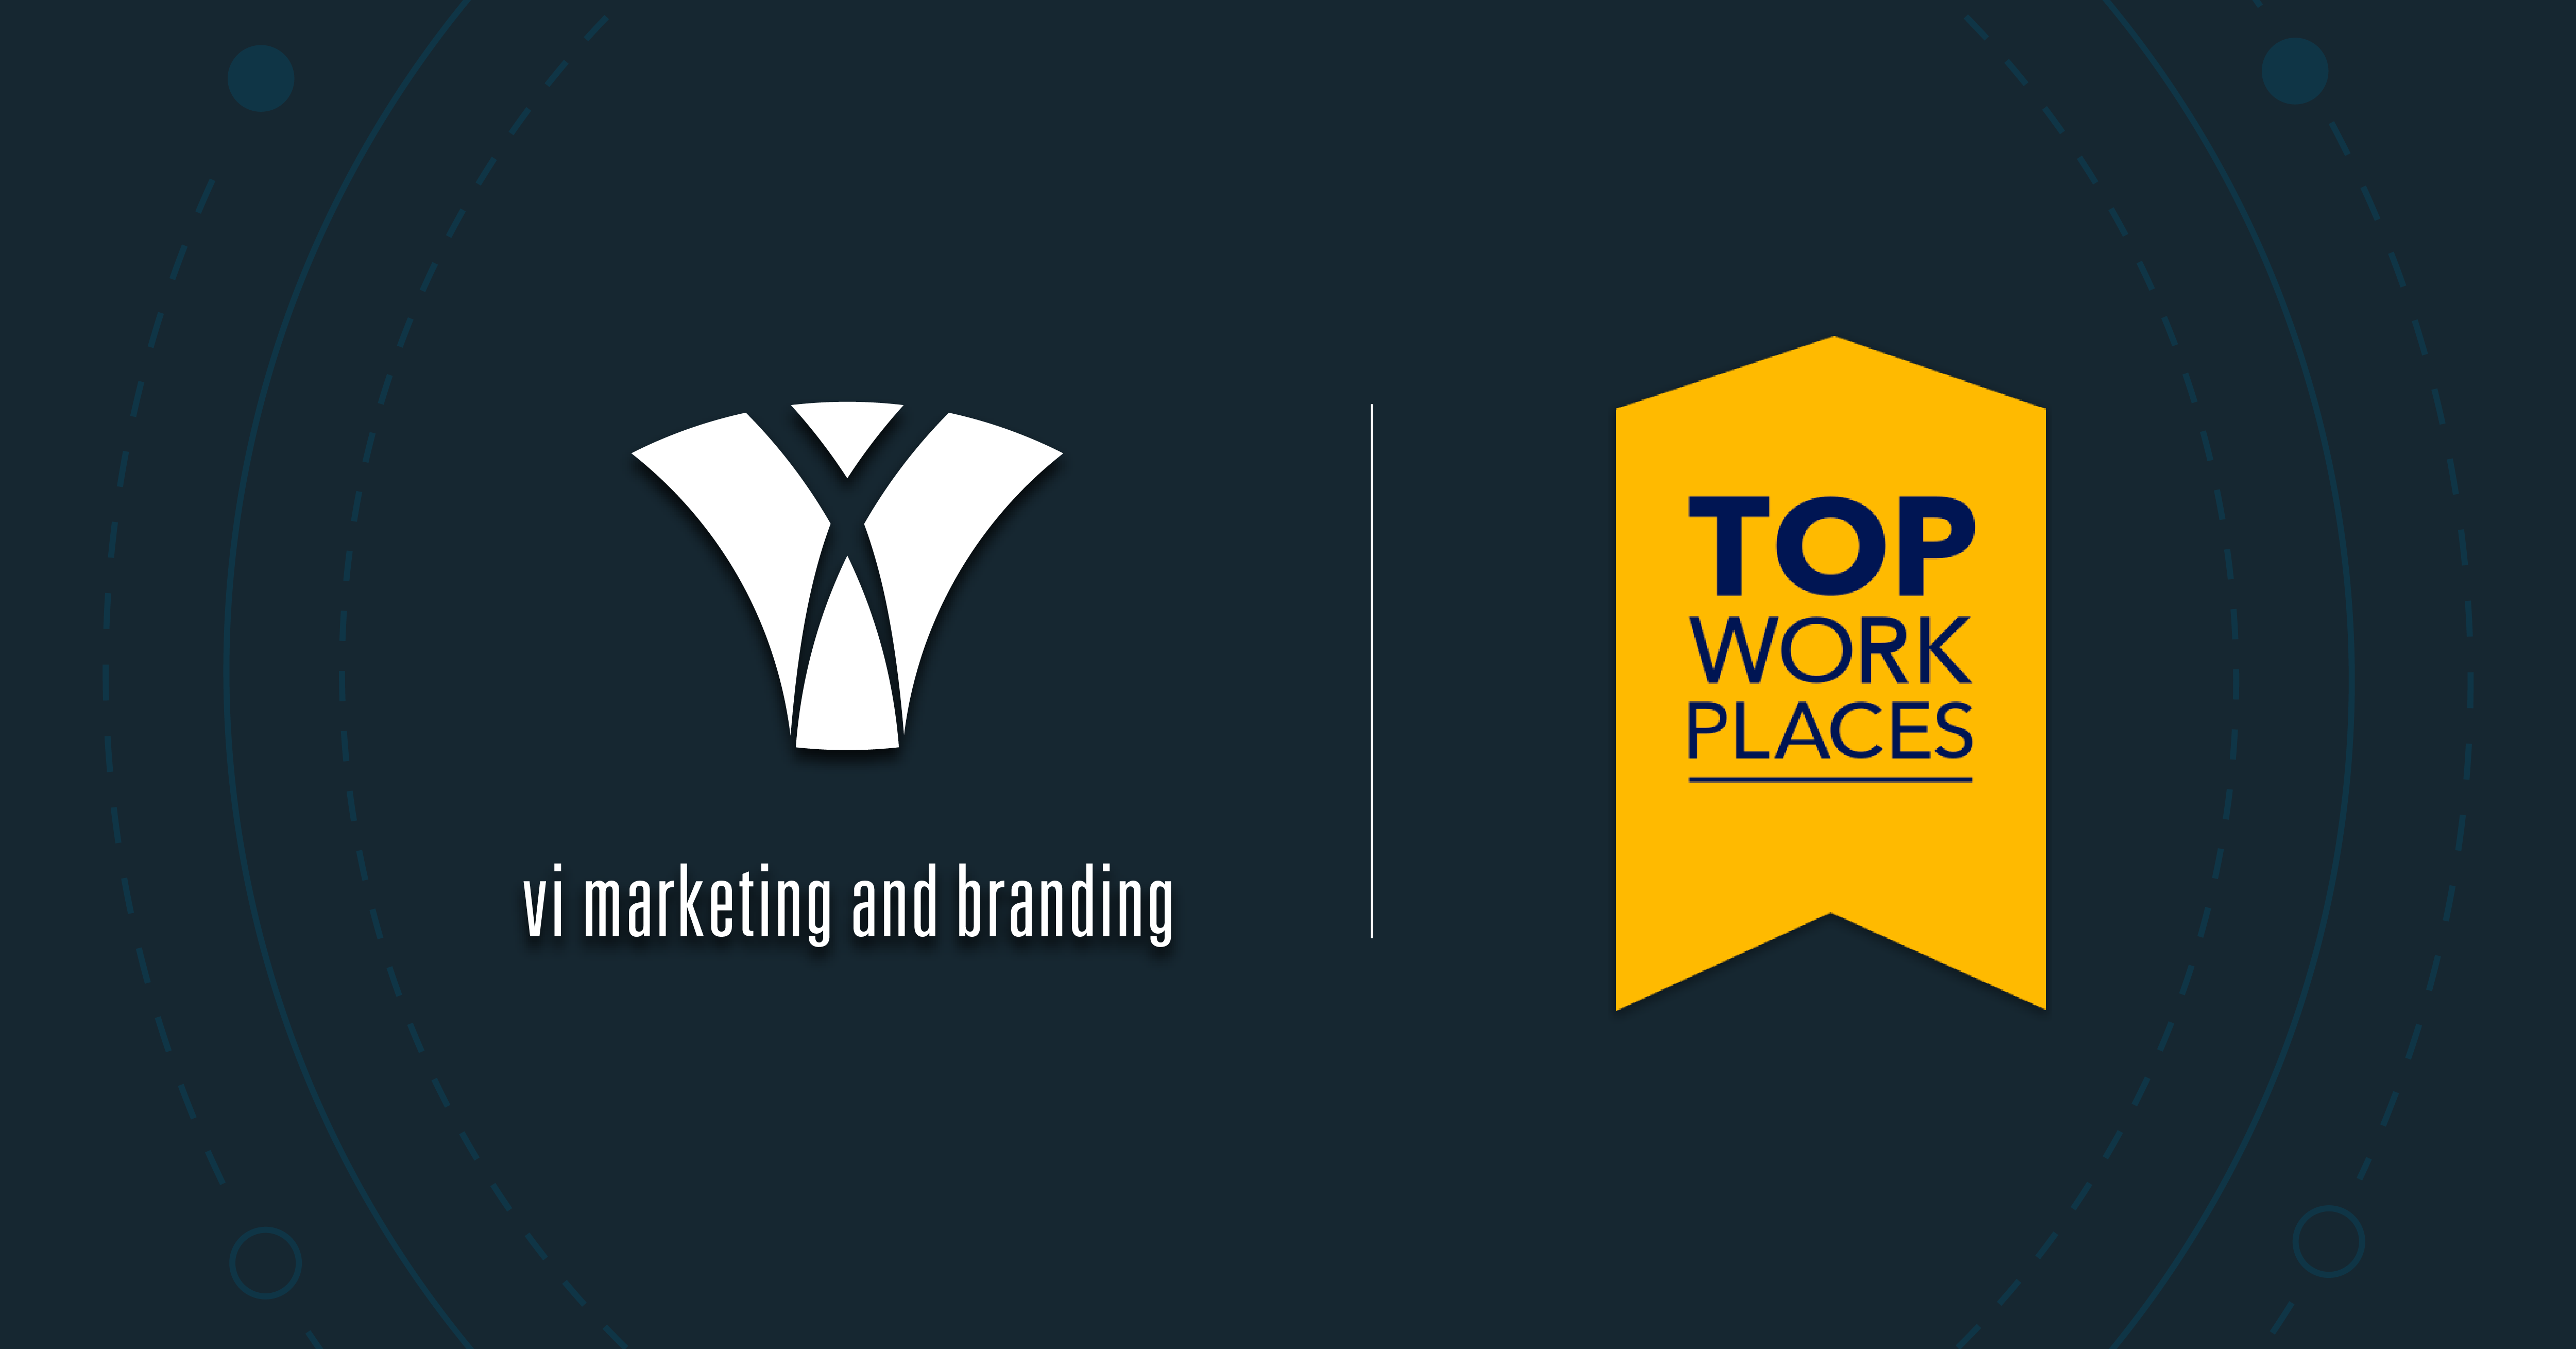 Top Workplaces logo and VI Marketing and Branding logo on dark blue background with decorative, transparent circles.